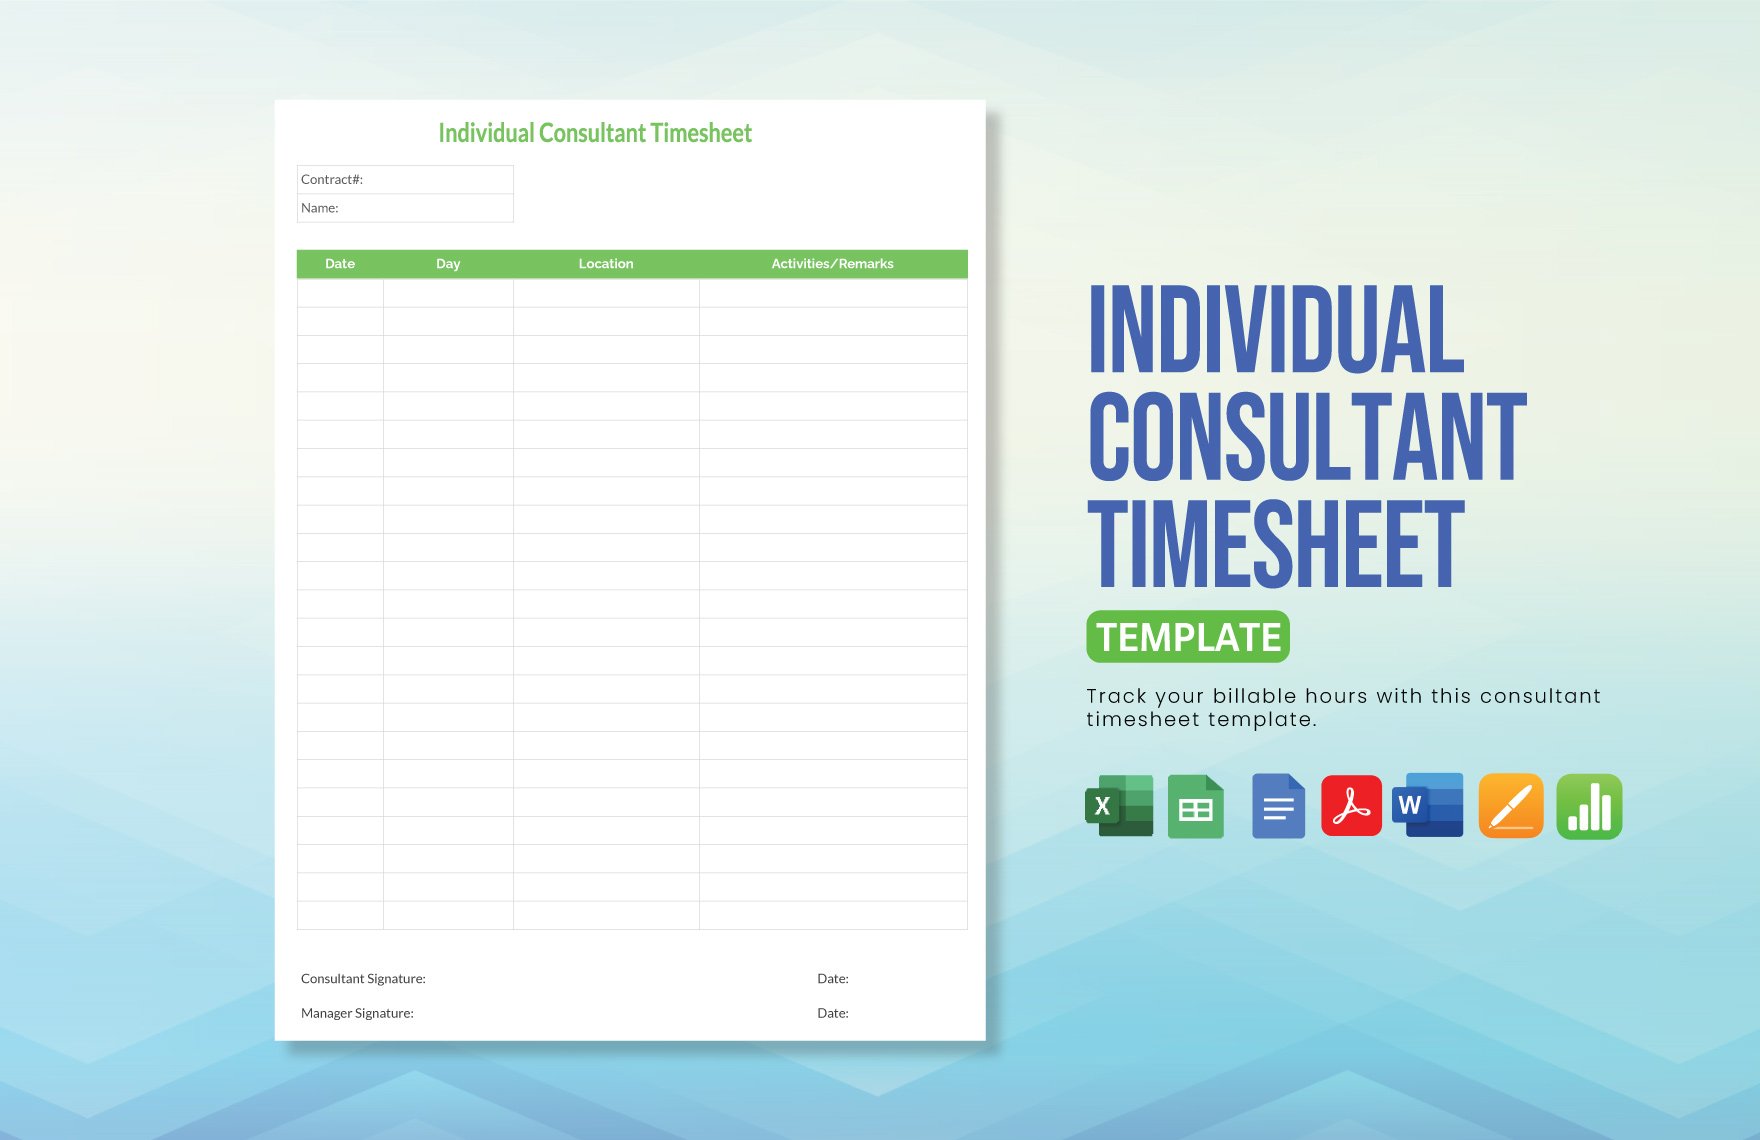 Individual Consultant Timesheet Template in Word, Google Docs, Excel, PDF, Google Sheets, Apple Pages, Apple Numbers